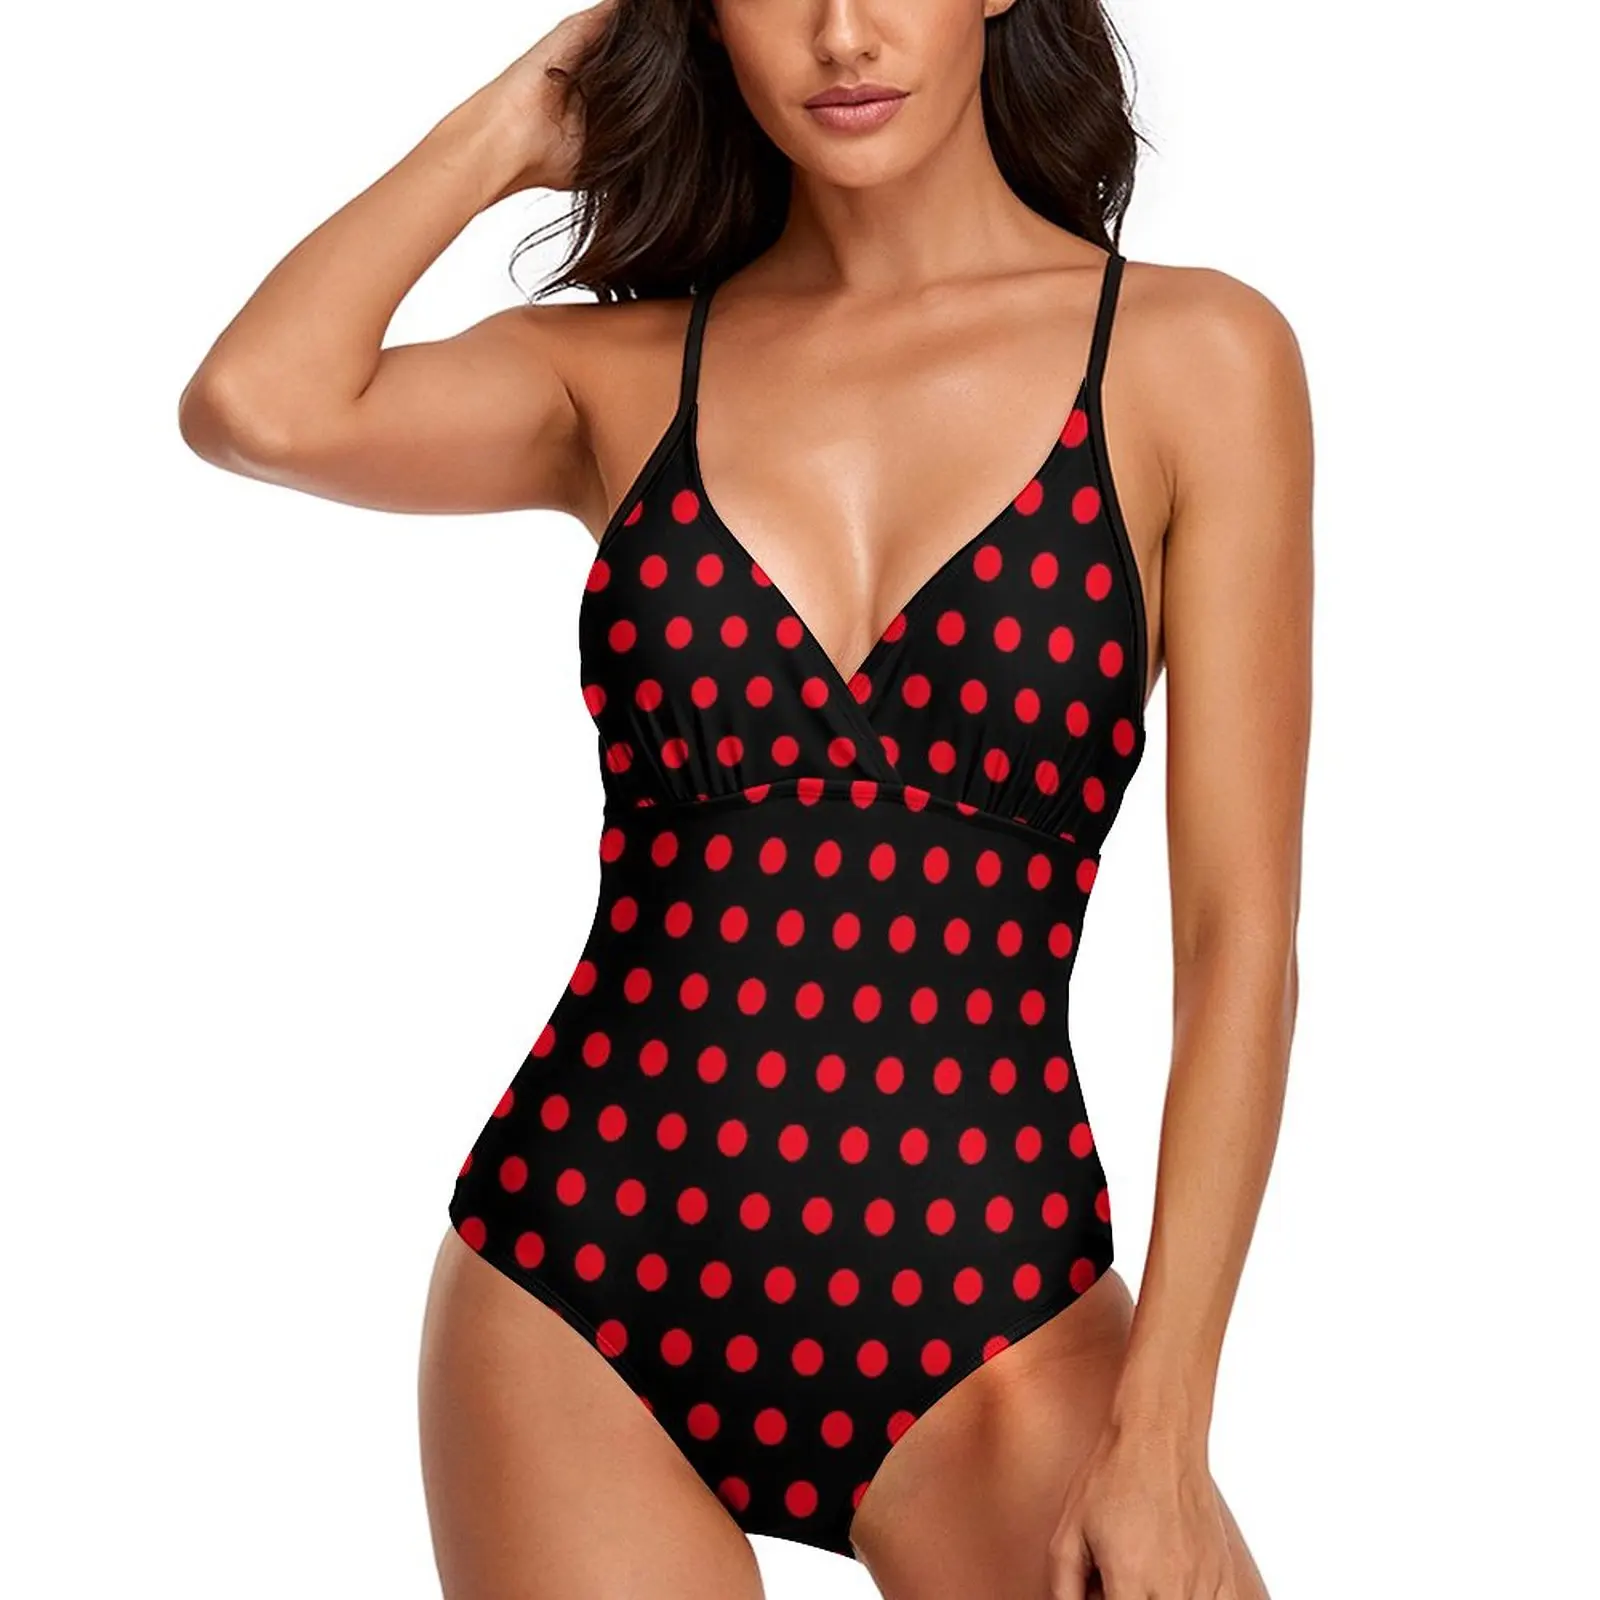 

Red Polka Dots Swimsuit Sexy Retro Print One Piece Swimwear Female Push Up Swimsuits Funny Bathing Suits High Cut Beachwear